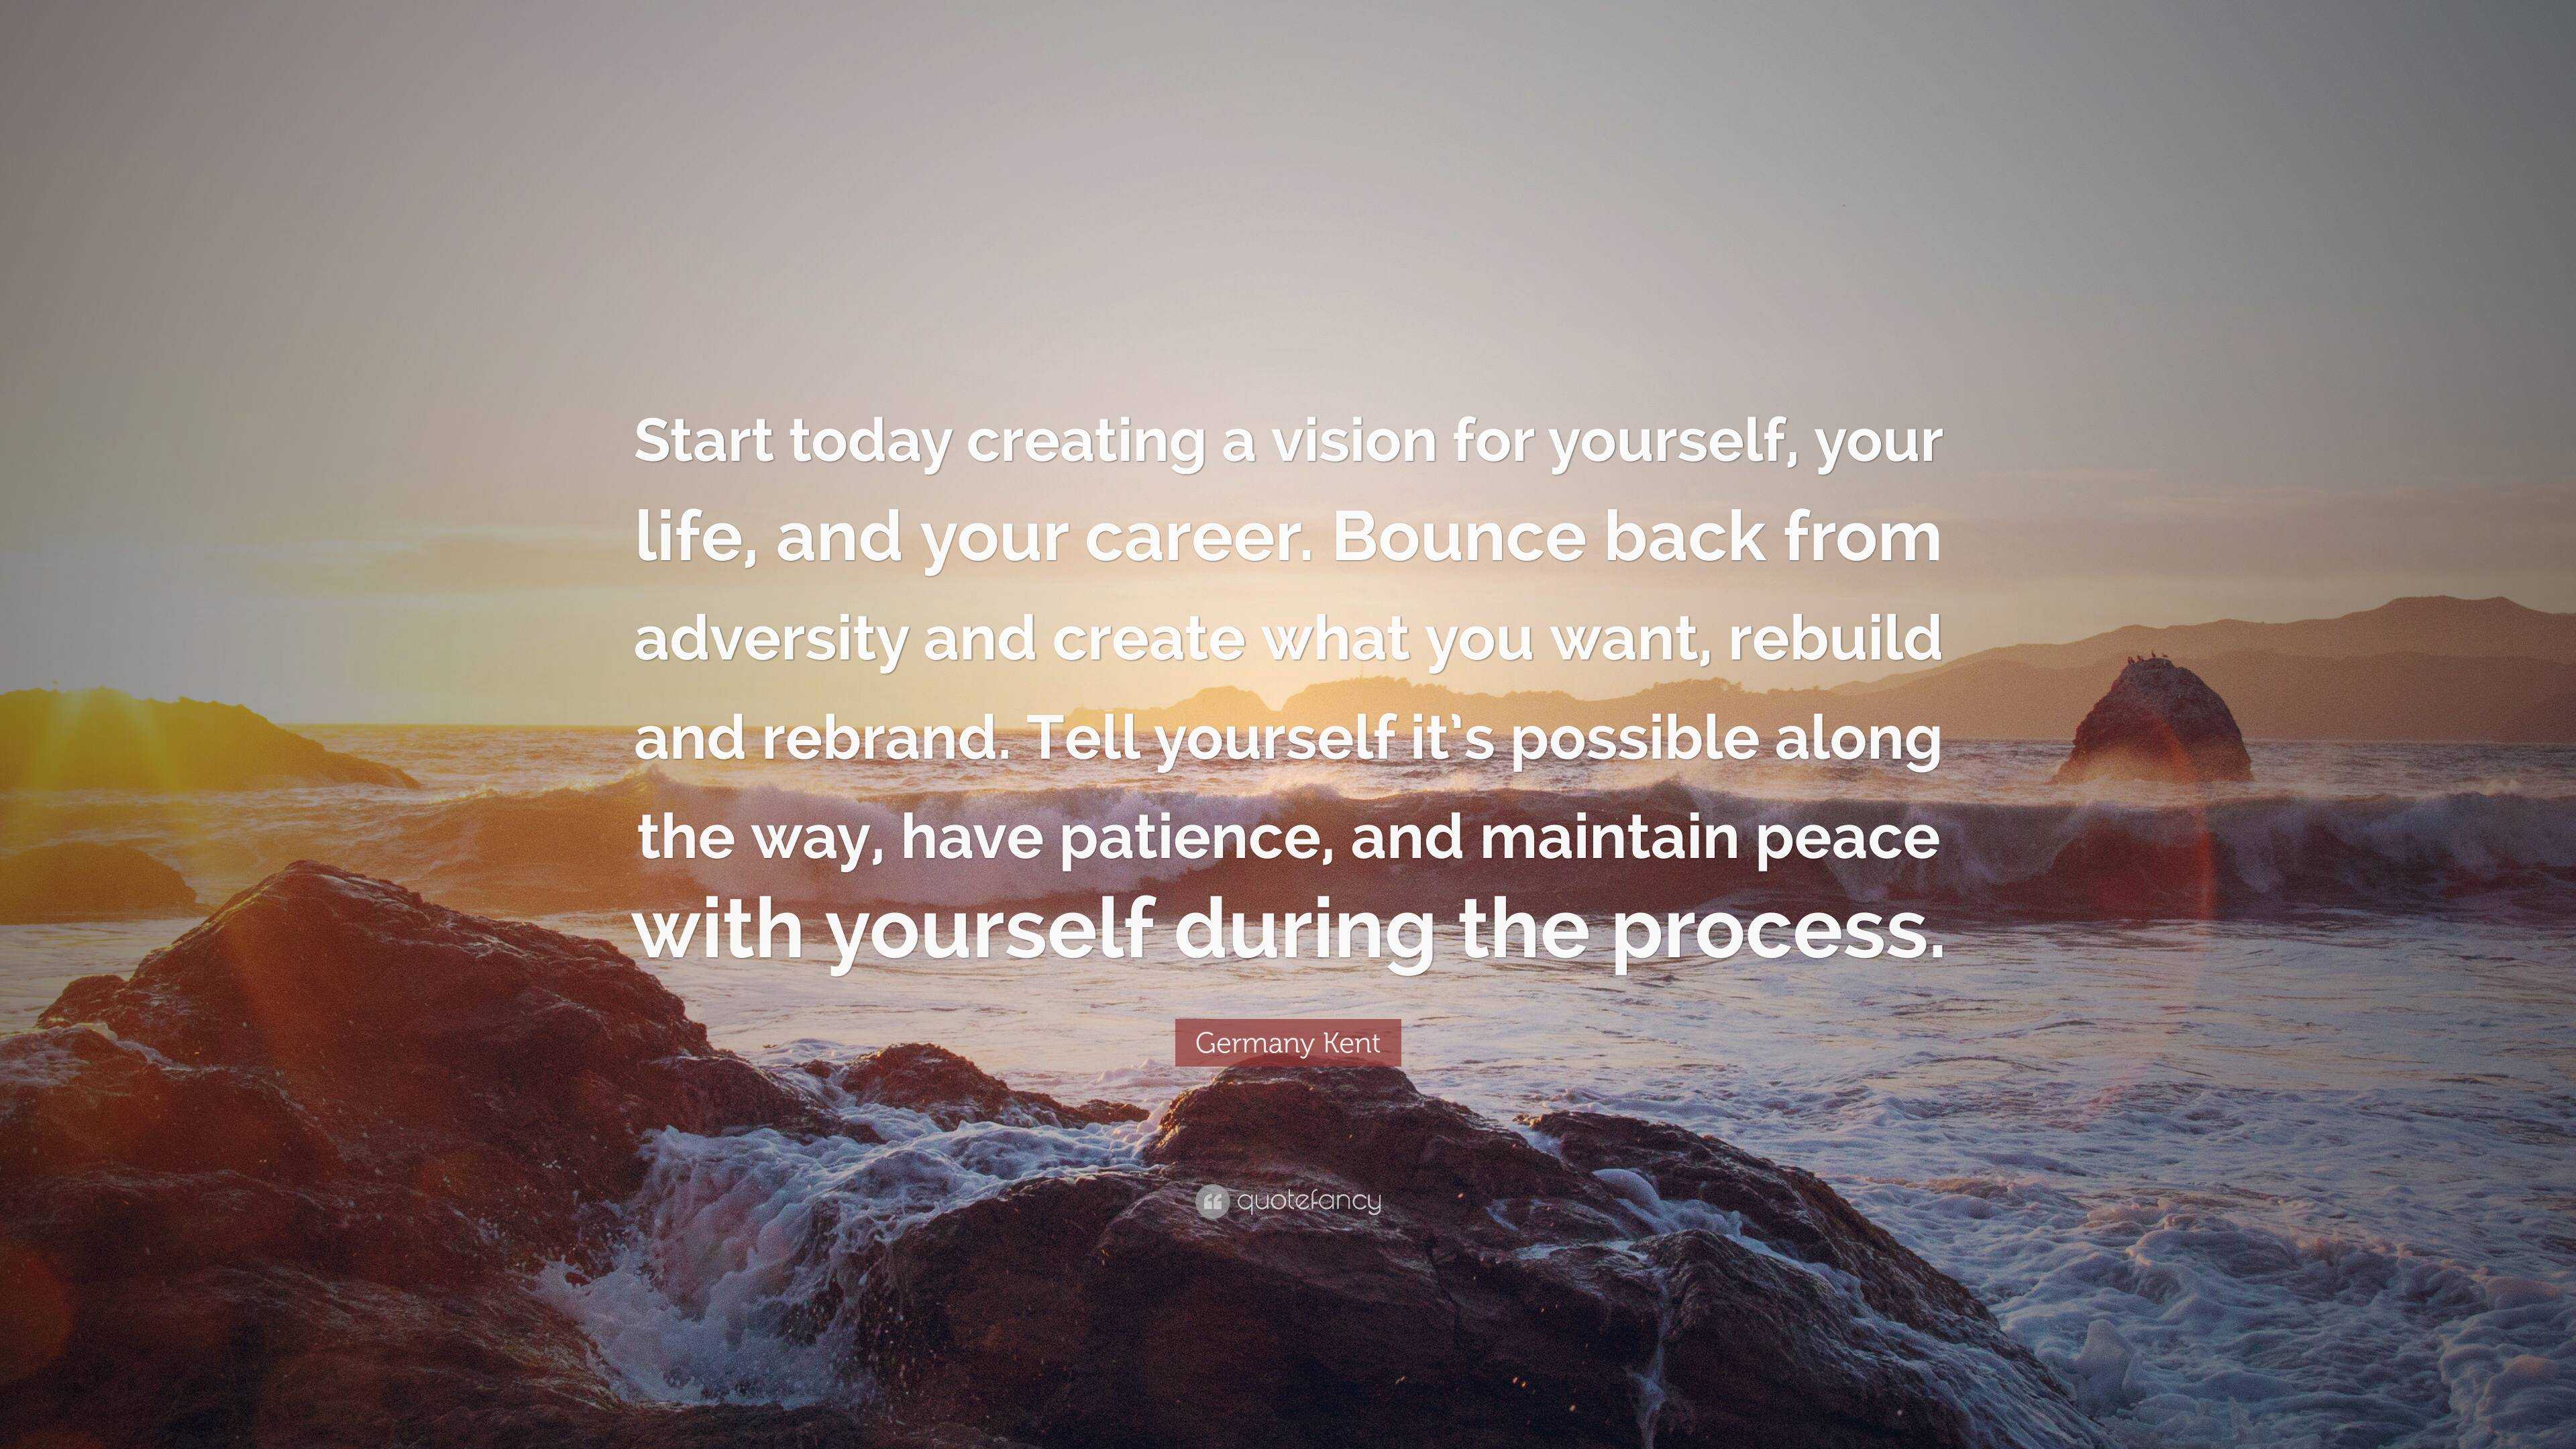 Germany Kent Quote: “Start today creating a vision for yourself, your ...